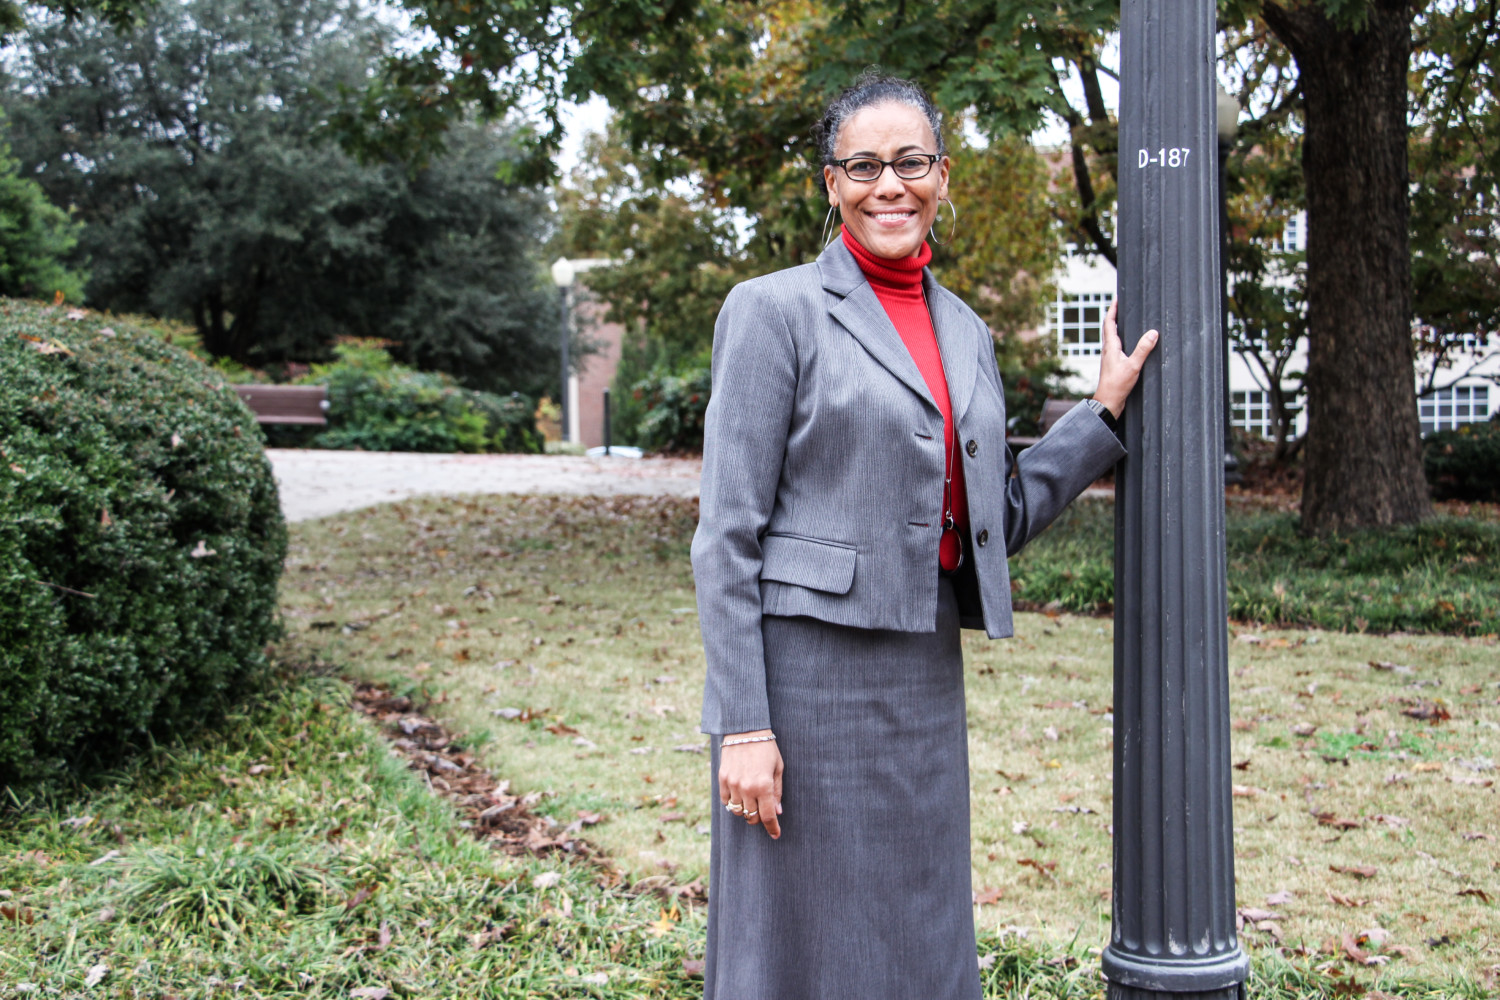 Beverly McAdams, interim director of OCES, at a photo shoot on Clemson's campus during her first week on Nov. 15, 2018.